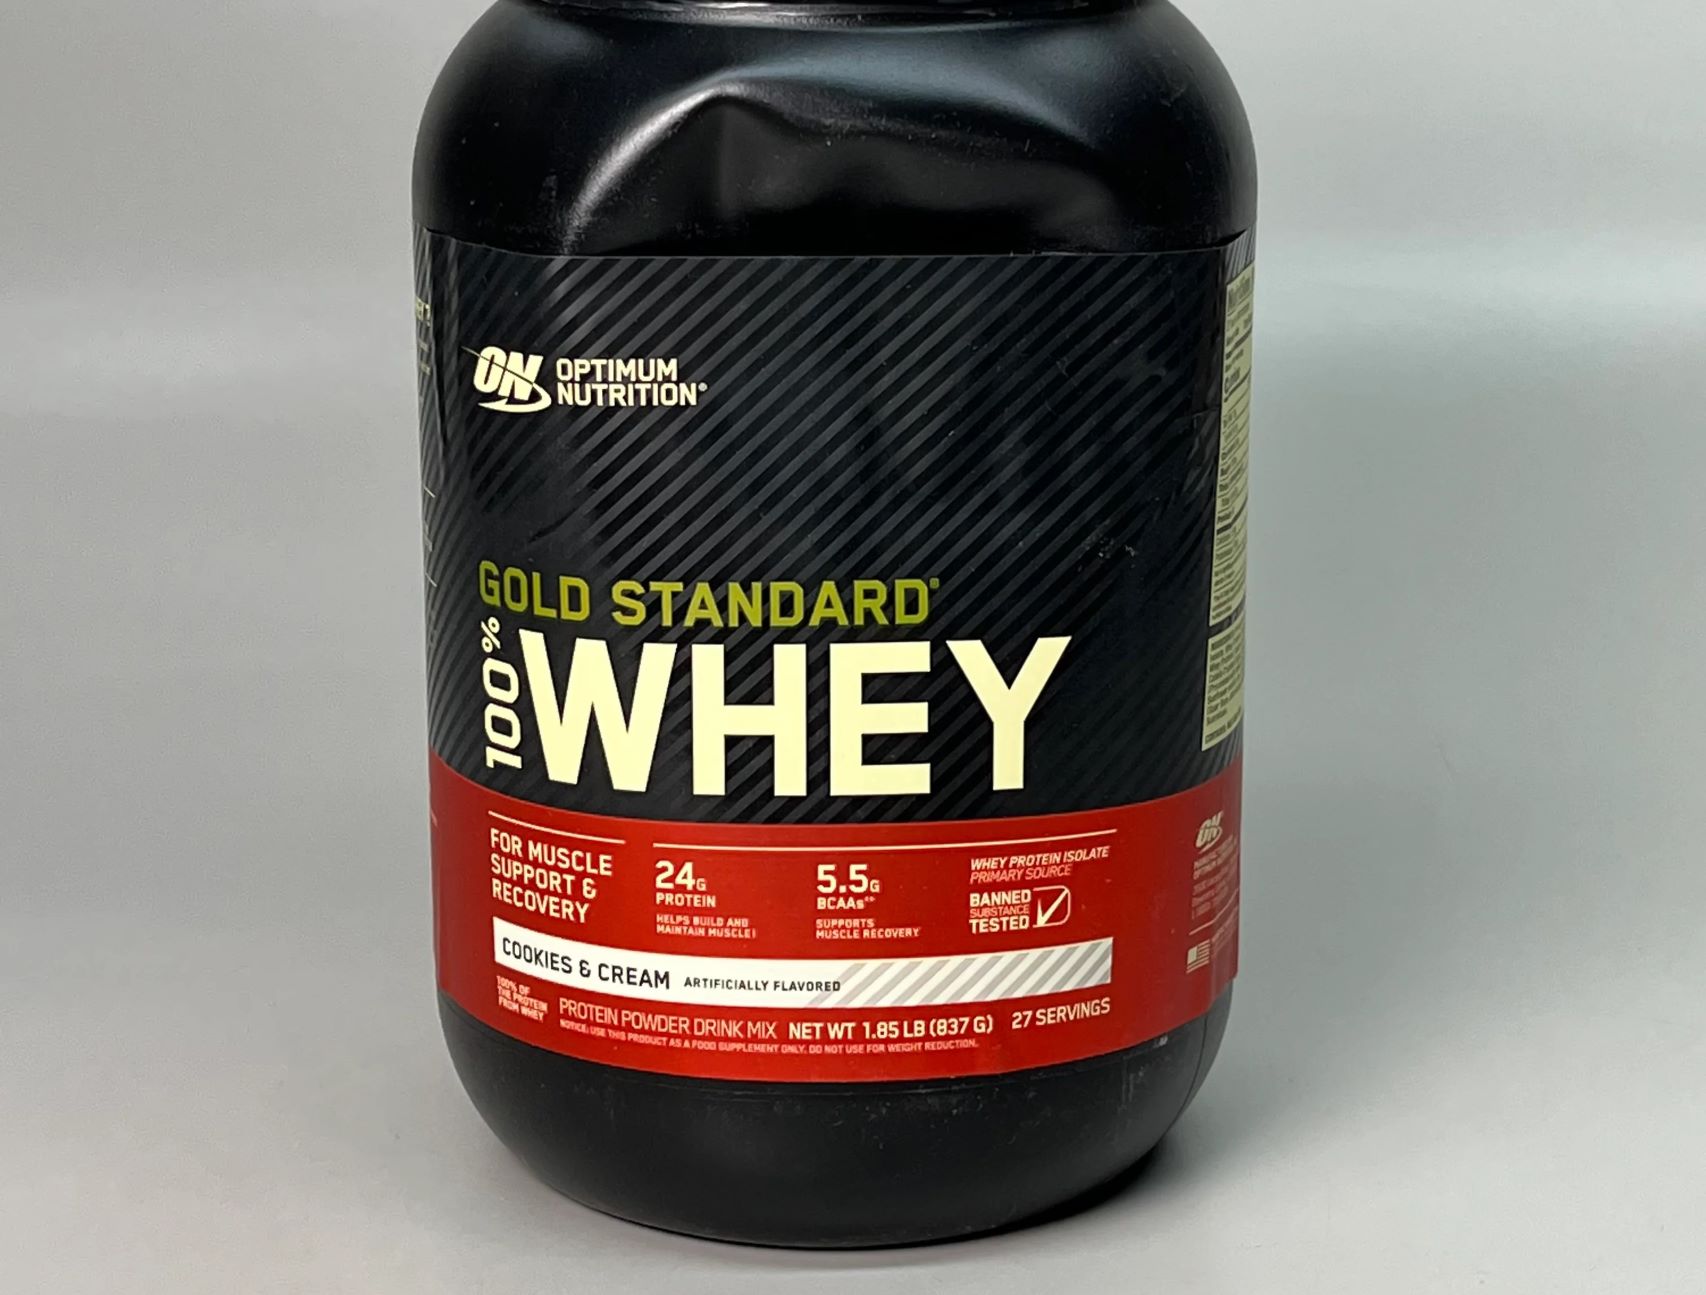 15-gold-standard-whey-cookies-and-cream-nutrition-facts